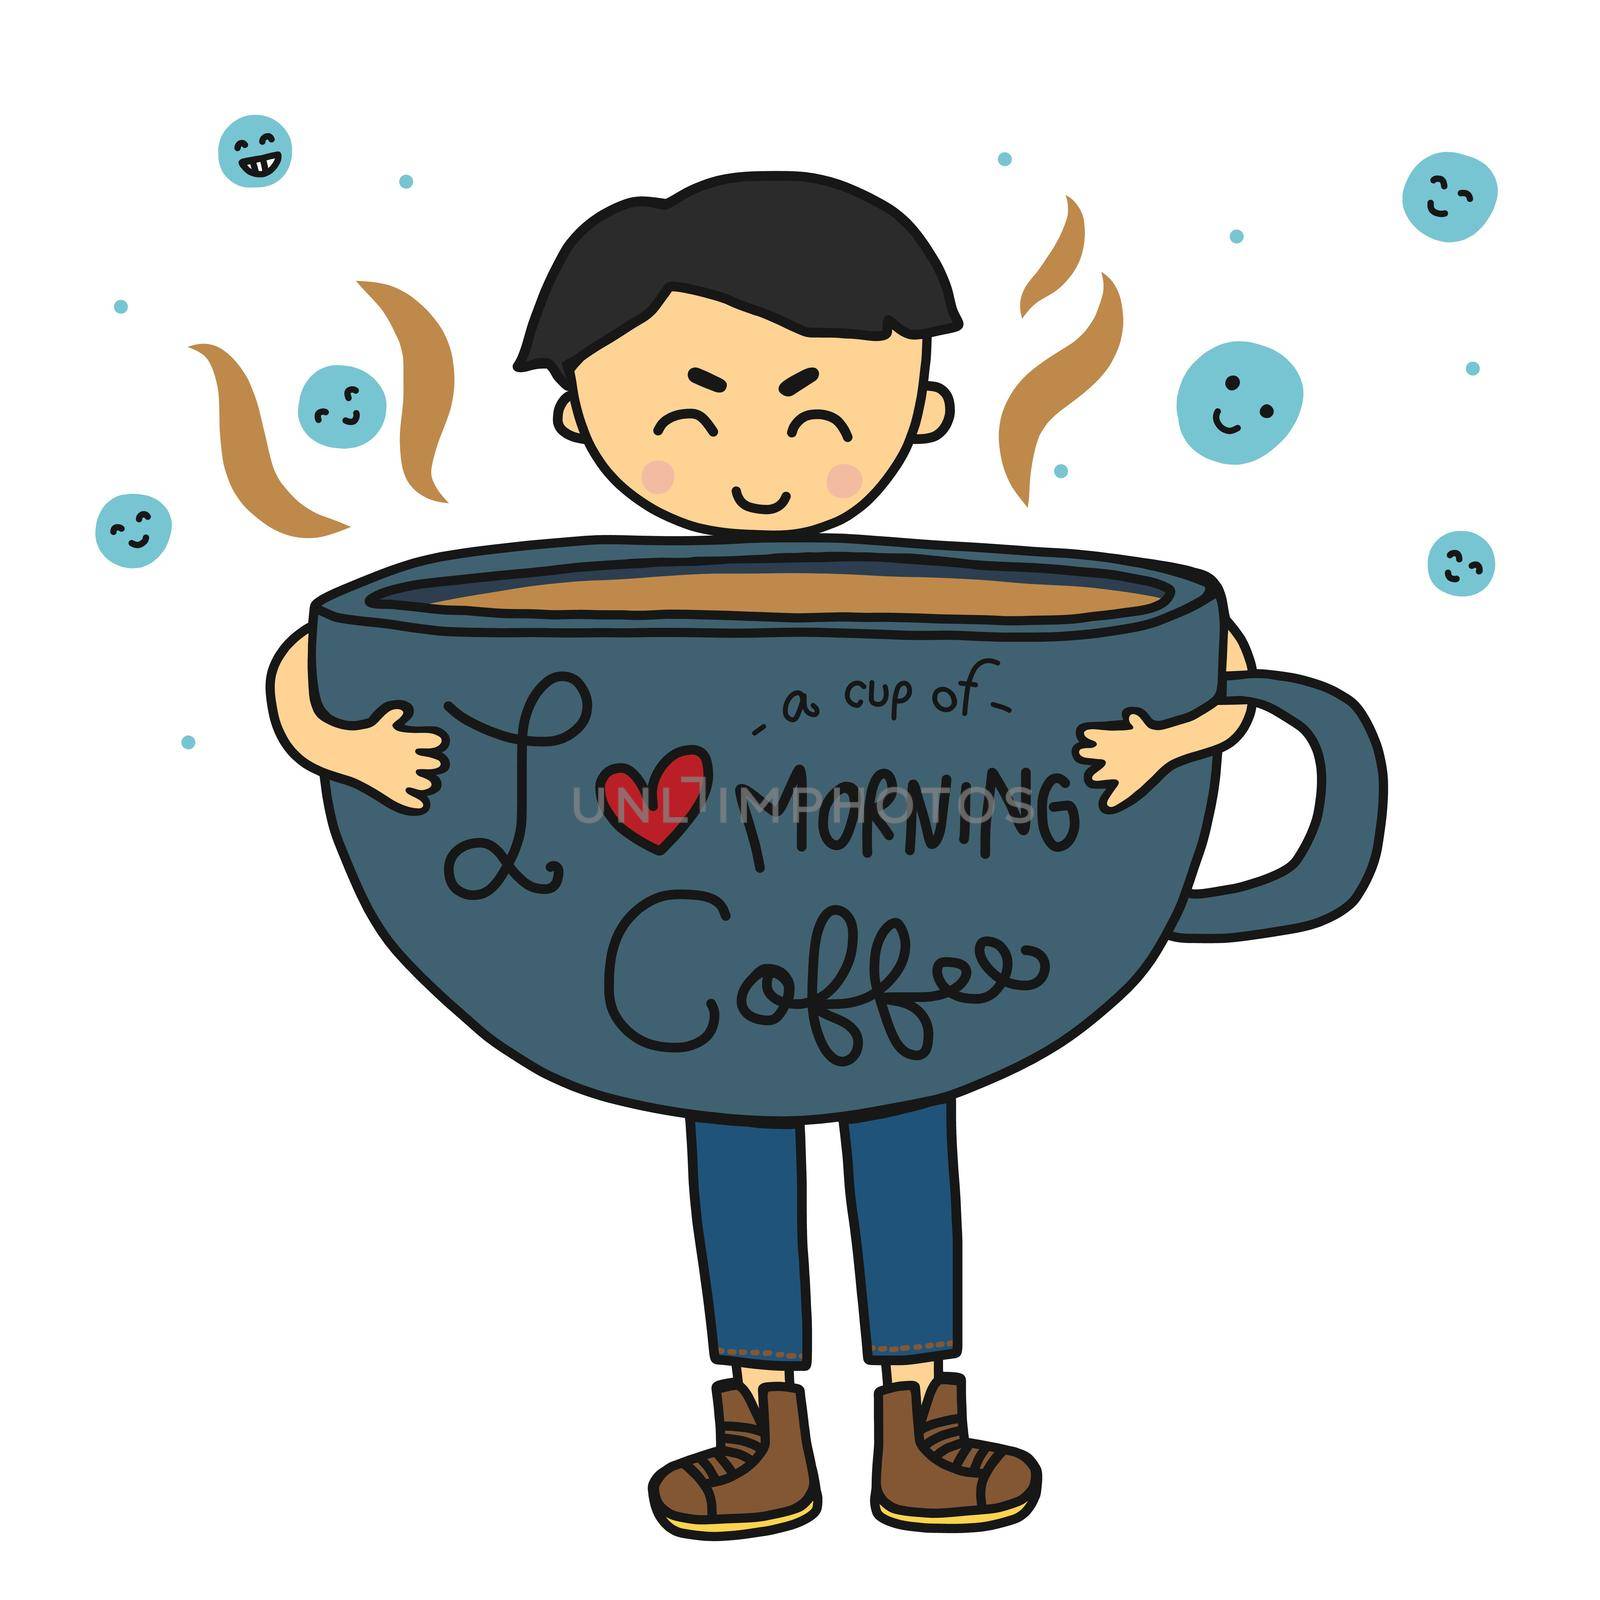 Man with big I love a cup of morning coffee cartoon doodle vector illustration by Yoopho